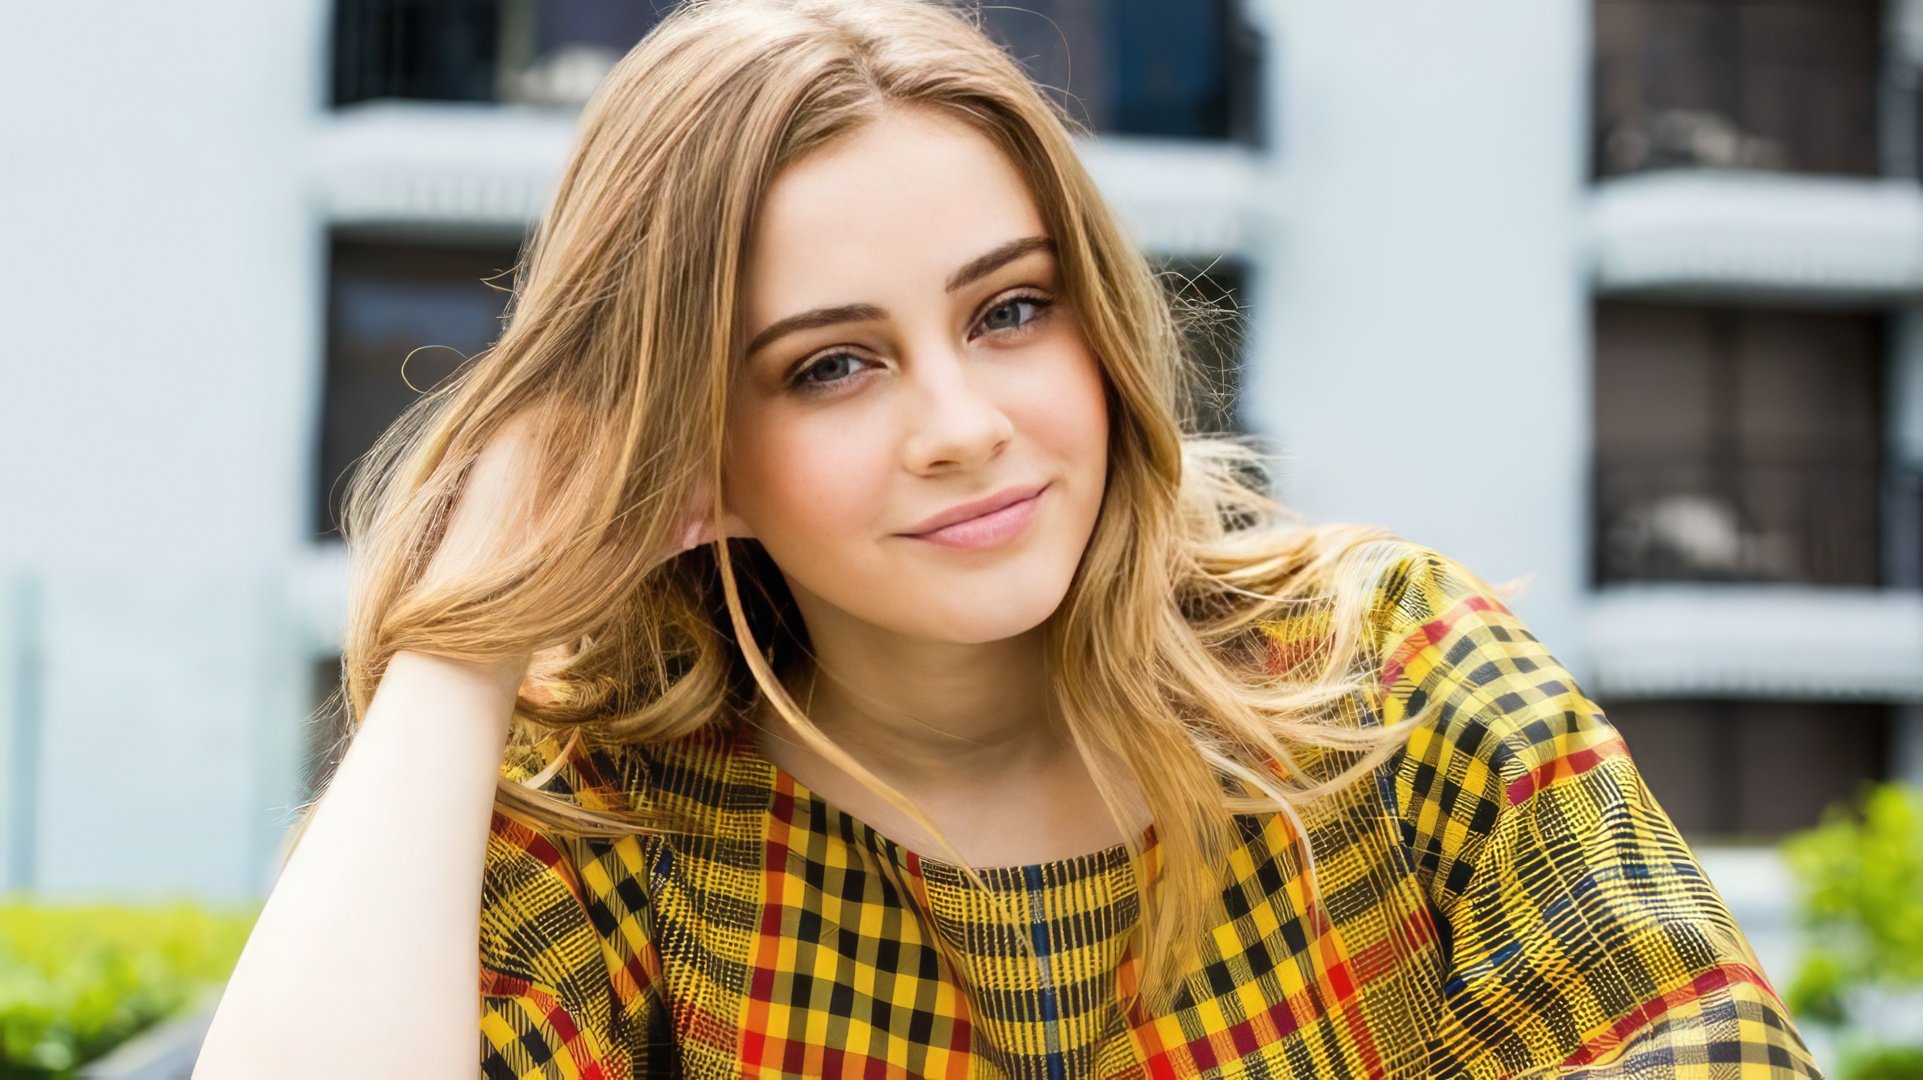 Josephine Langford was born into a medical family from Australia